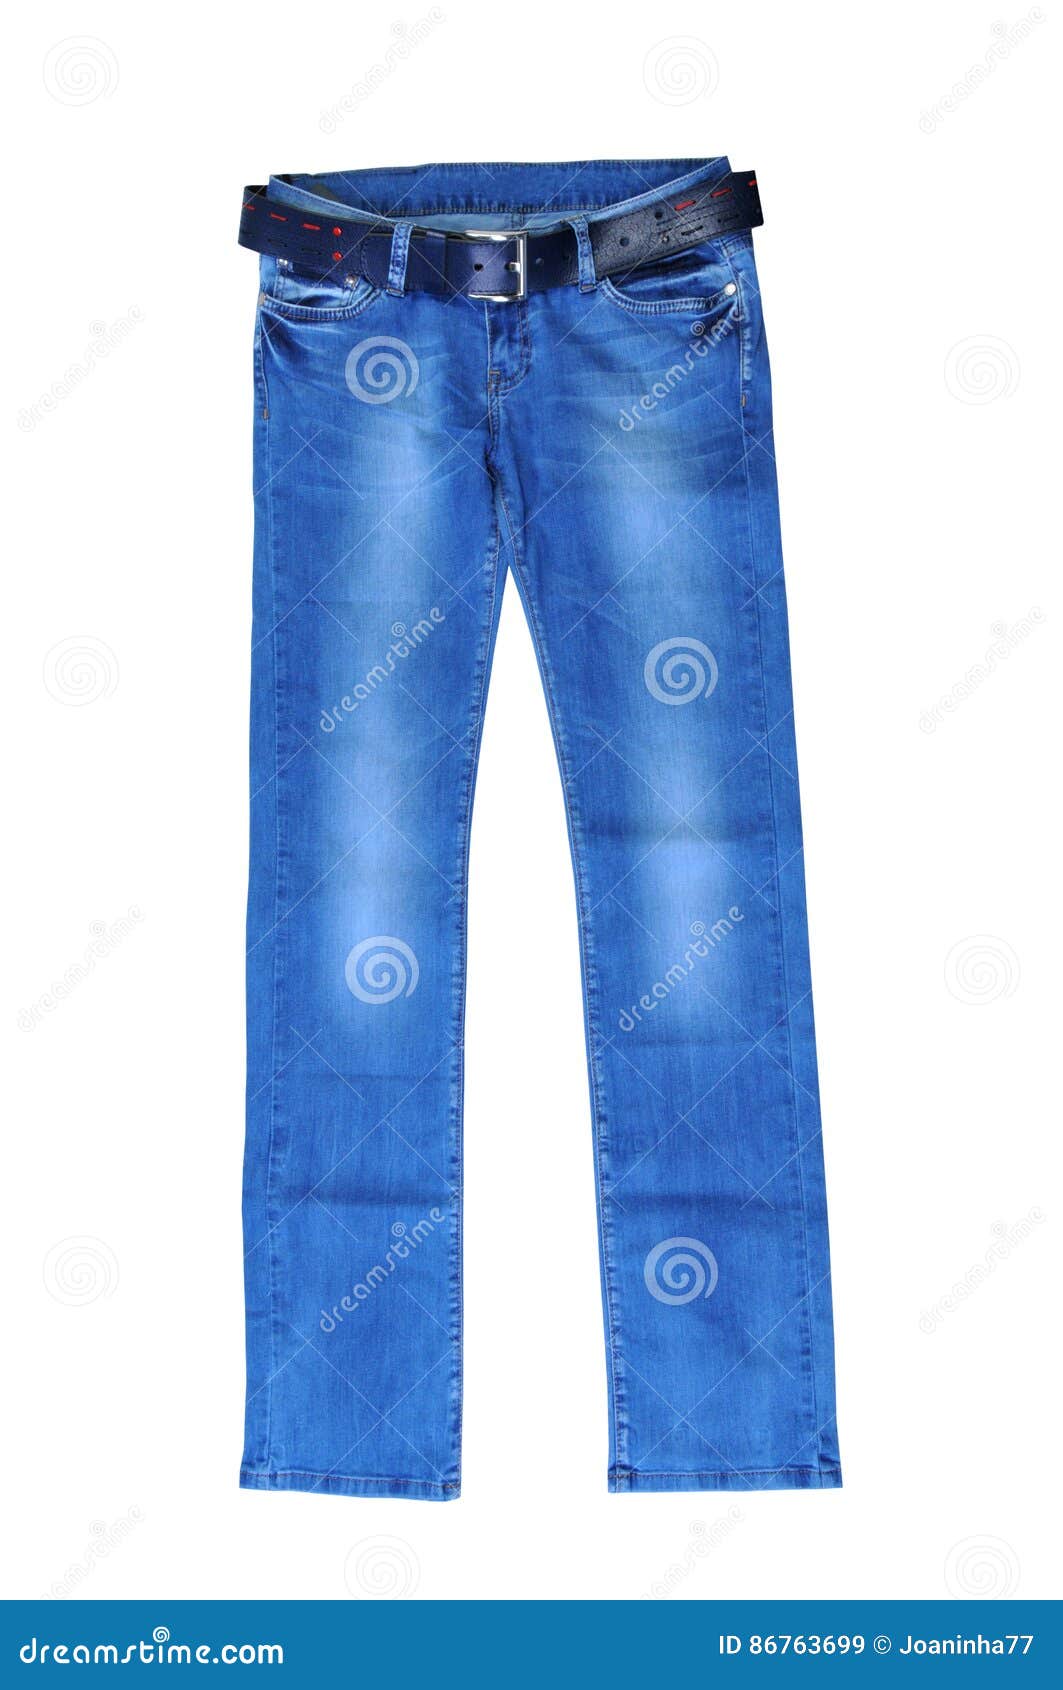 Blue Jeans for Women with Dark Blue Belt. Isolated on White Stock Image ...